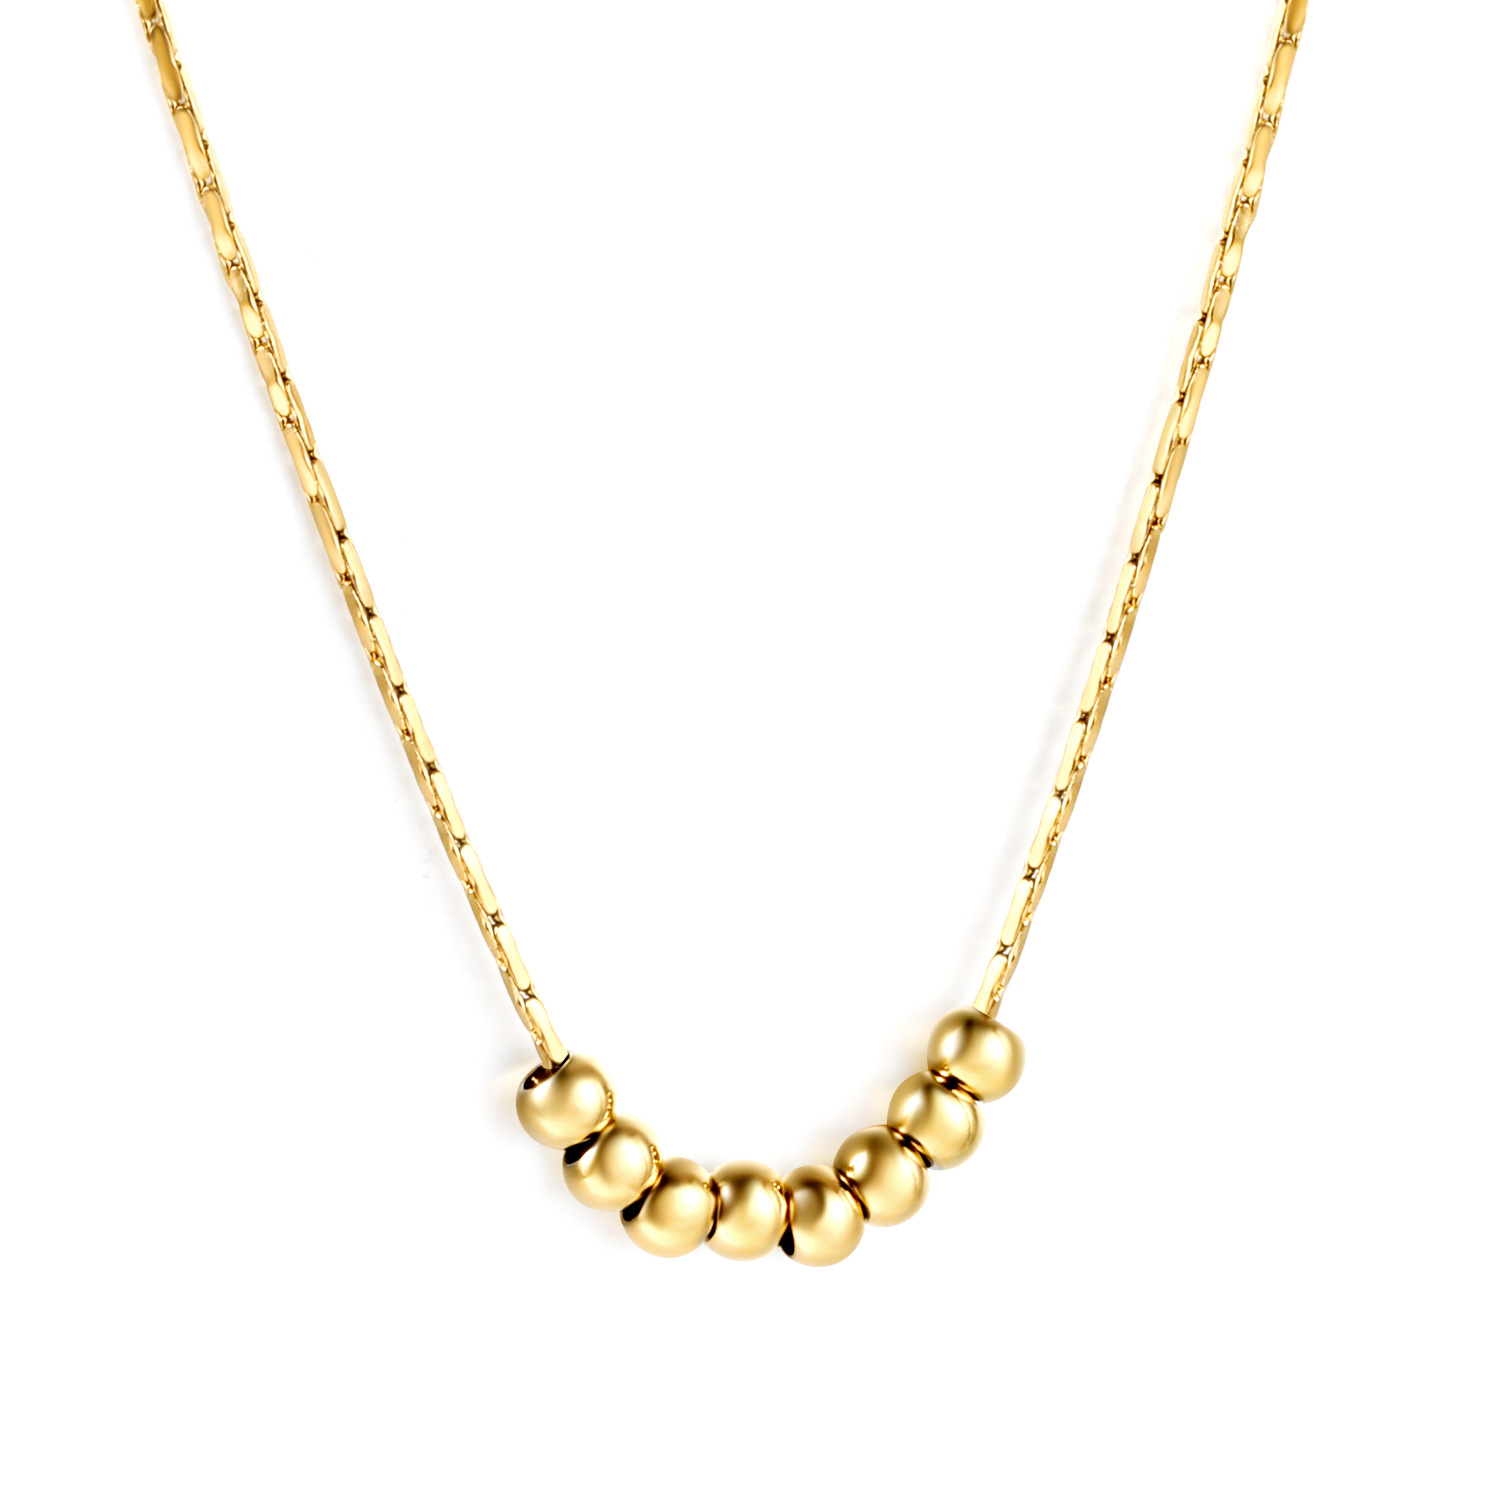 Steel ball pendant necklace gold